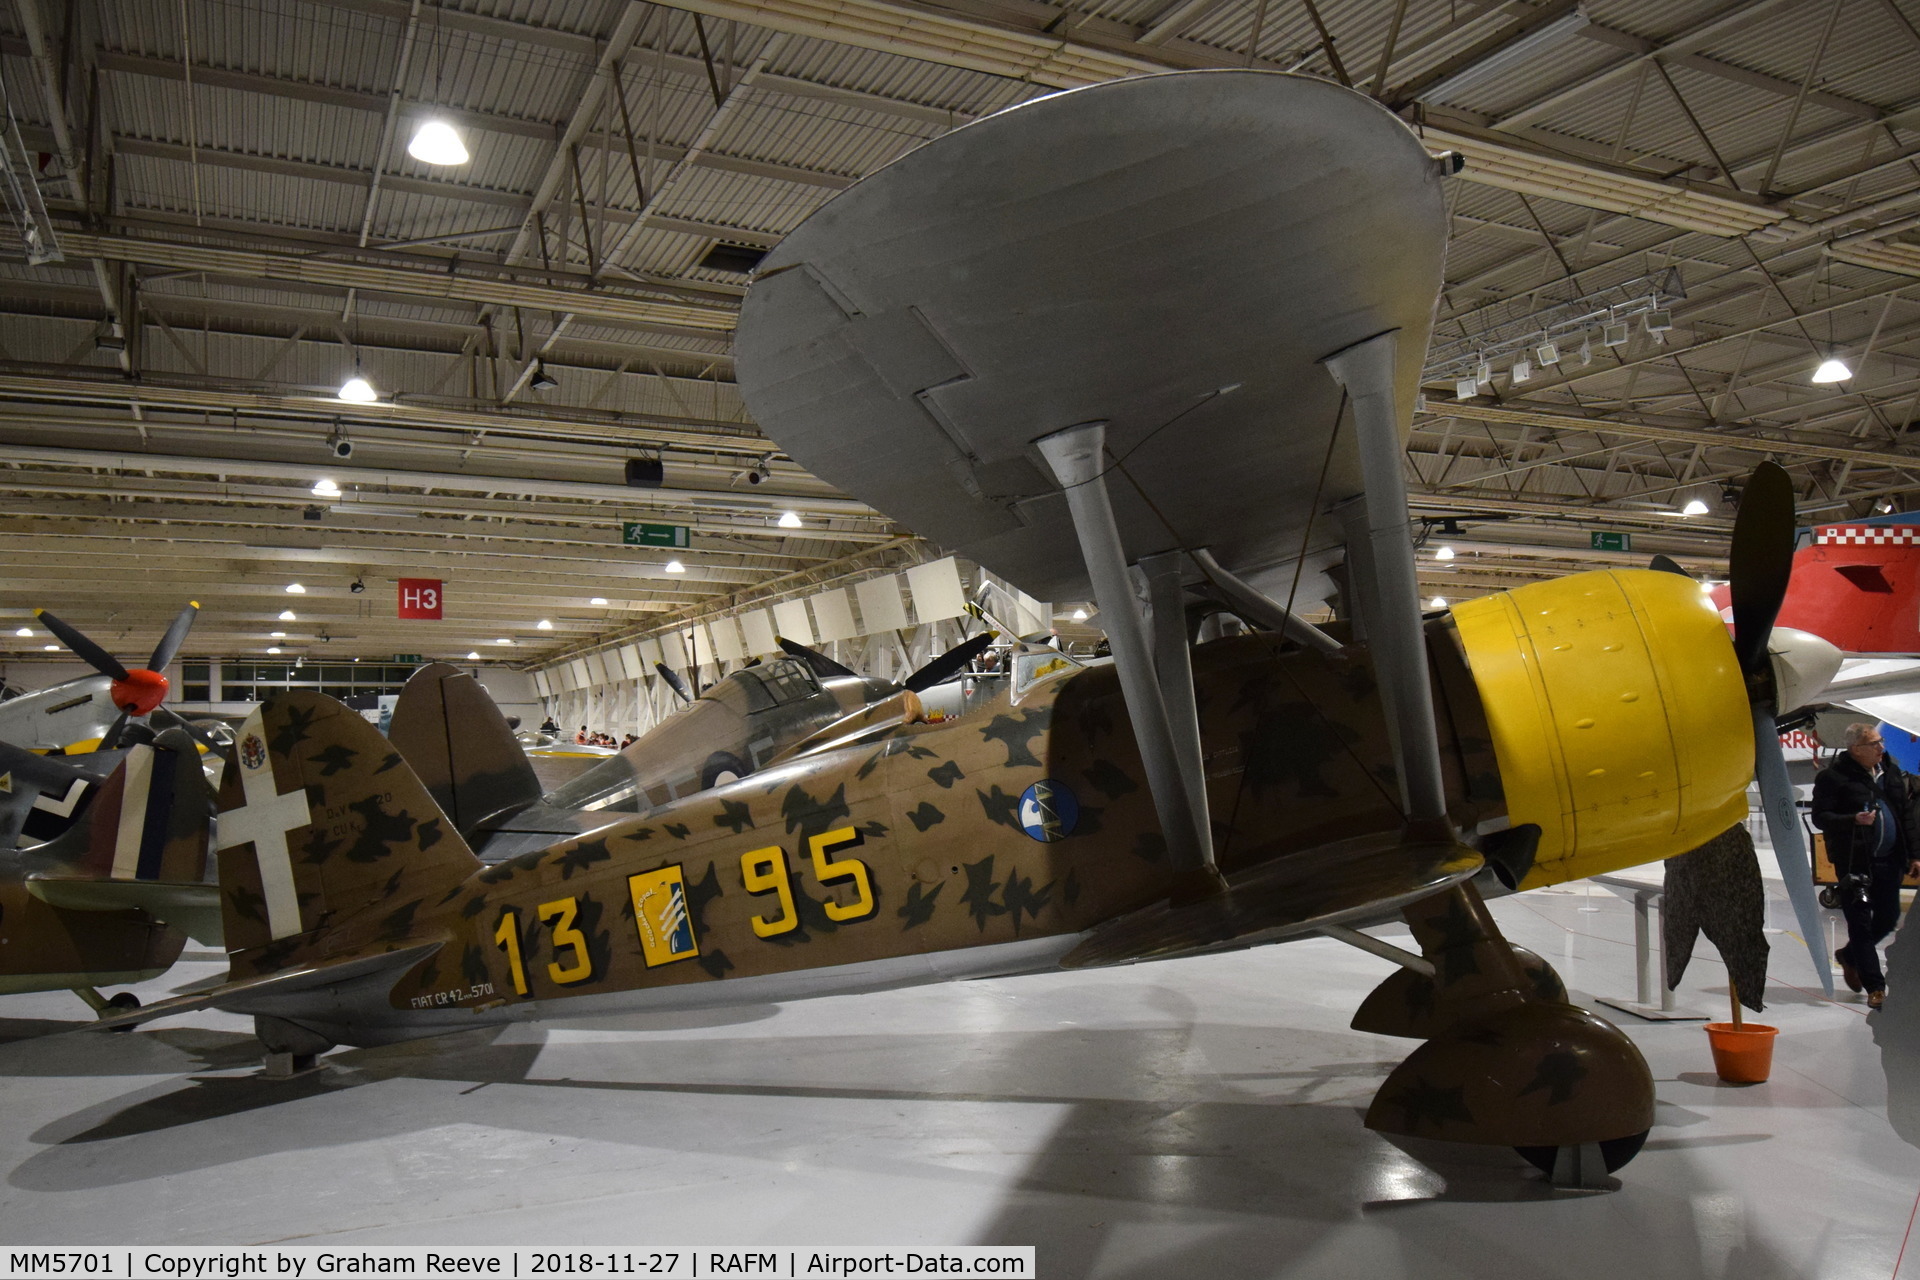 MM5701, Fiat CR.42 Falco C/N Not found MM5701, On display at the RAF Museum, Hendon.